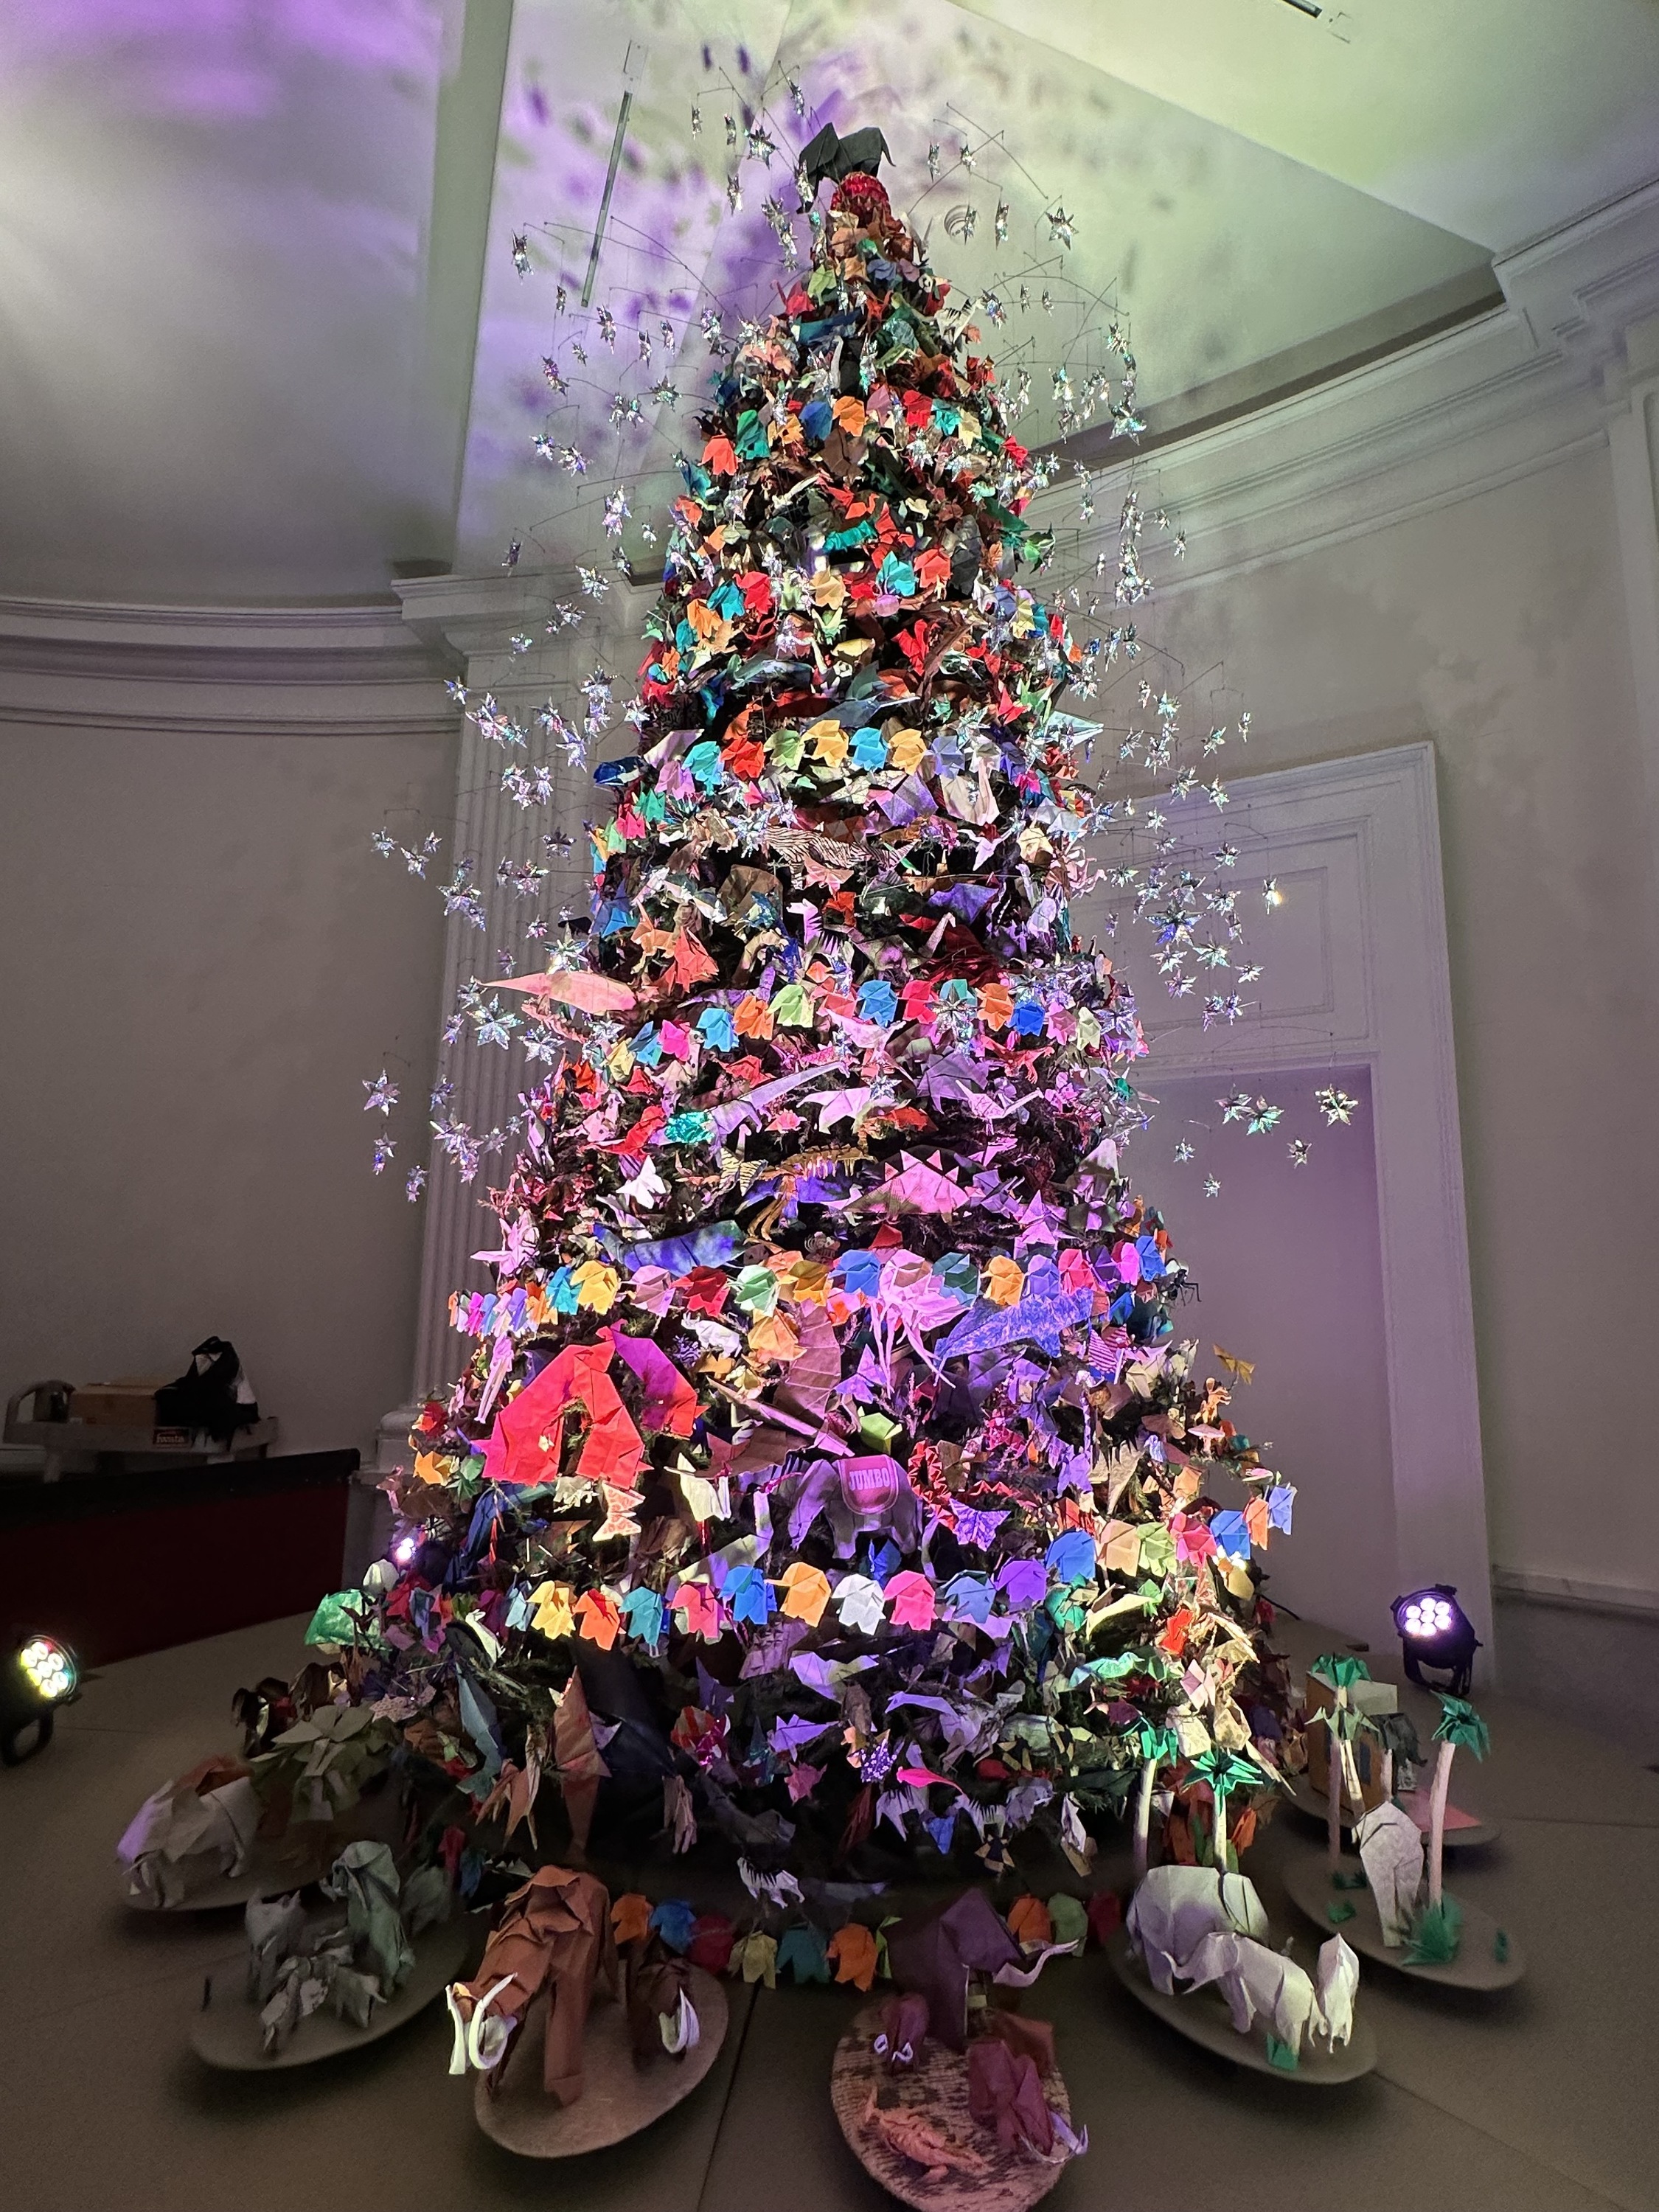 A Christmas tree decorated with origami ornaments.